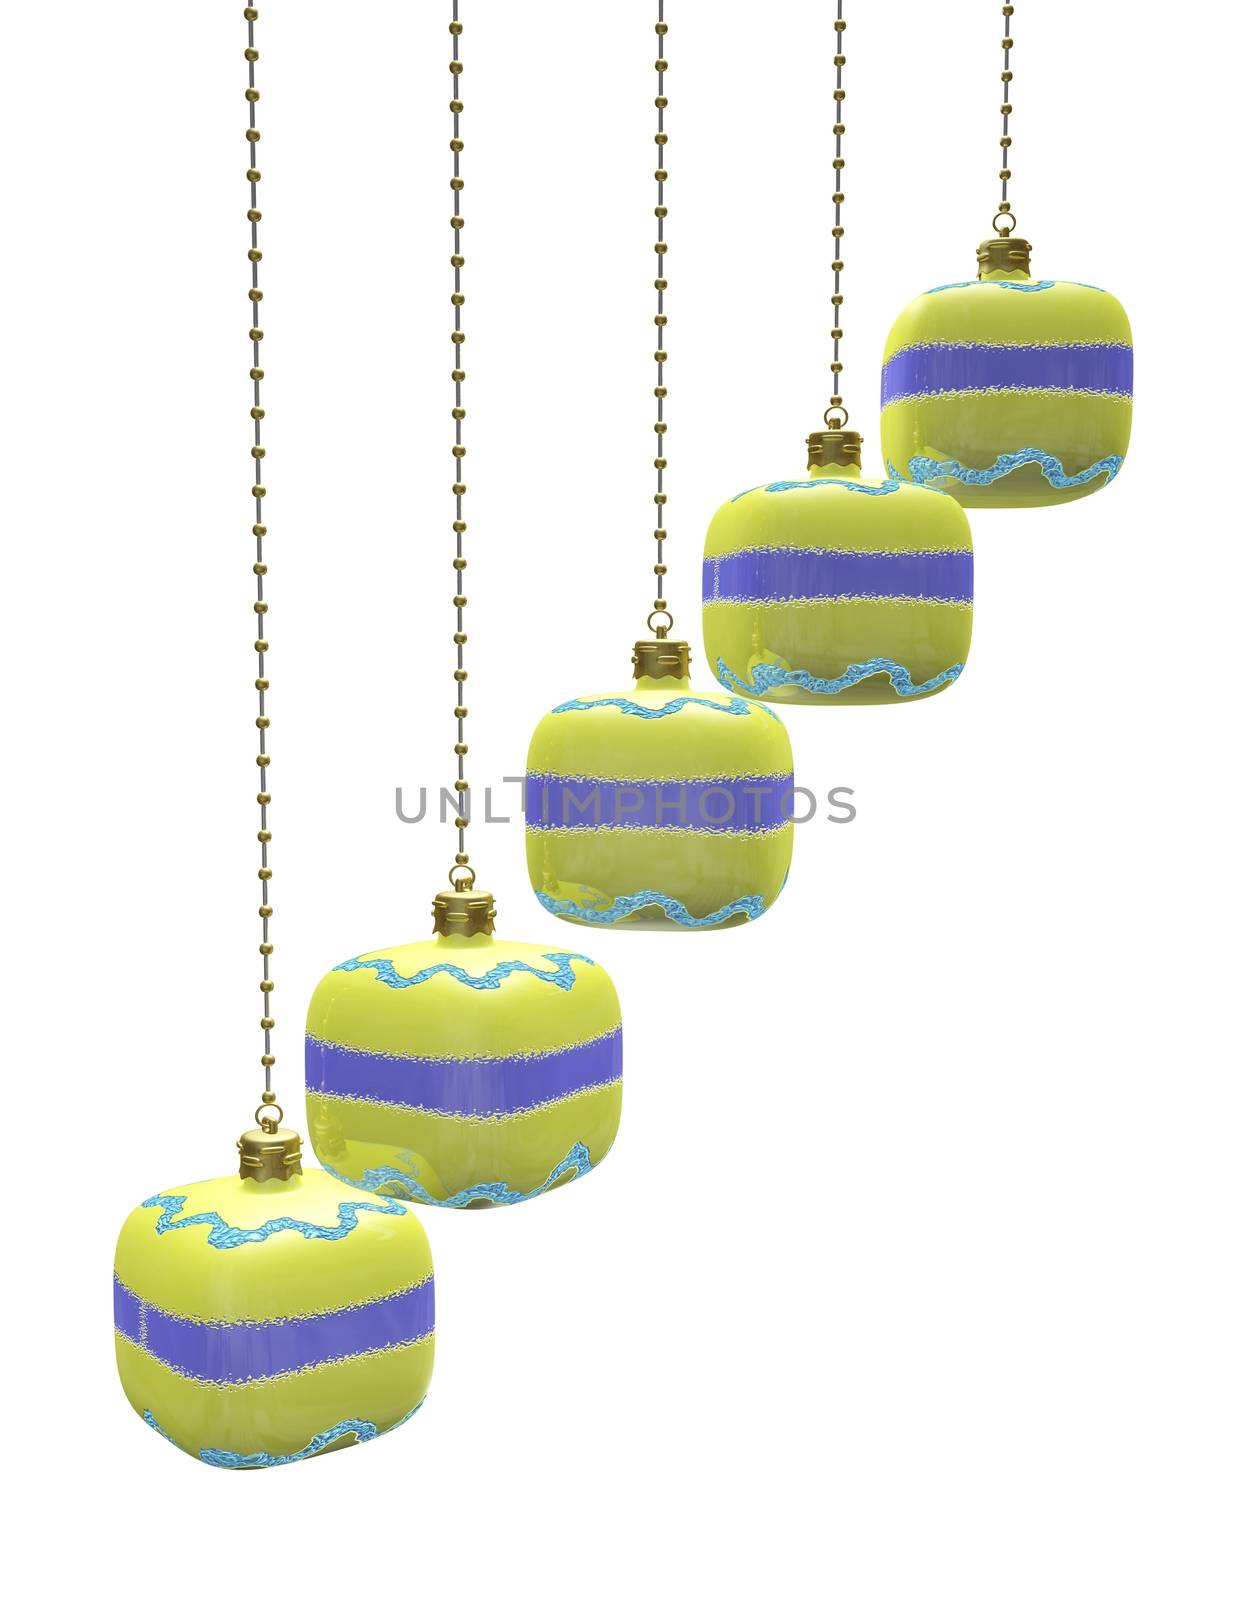 This 3D illustration shows a row of cube shaped Christmas decoration baubles hanging from metal chains. The image will find use in decoration, festivals, celebration, Christmas and new year related concepts.
